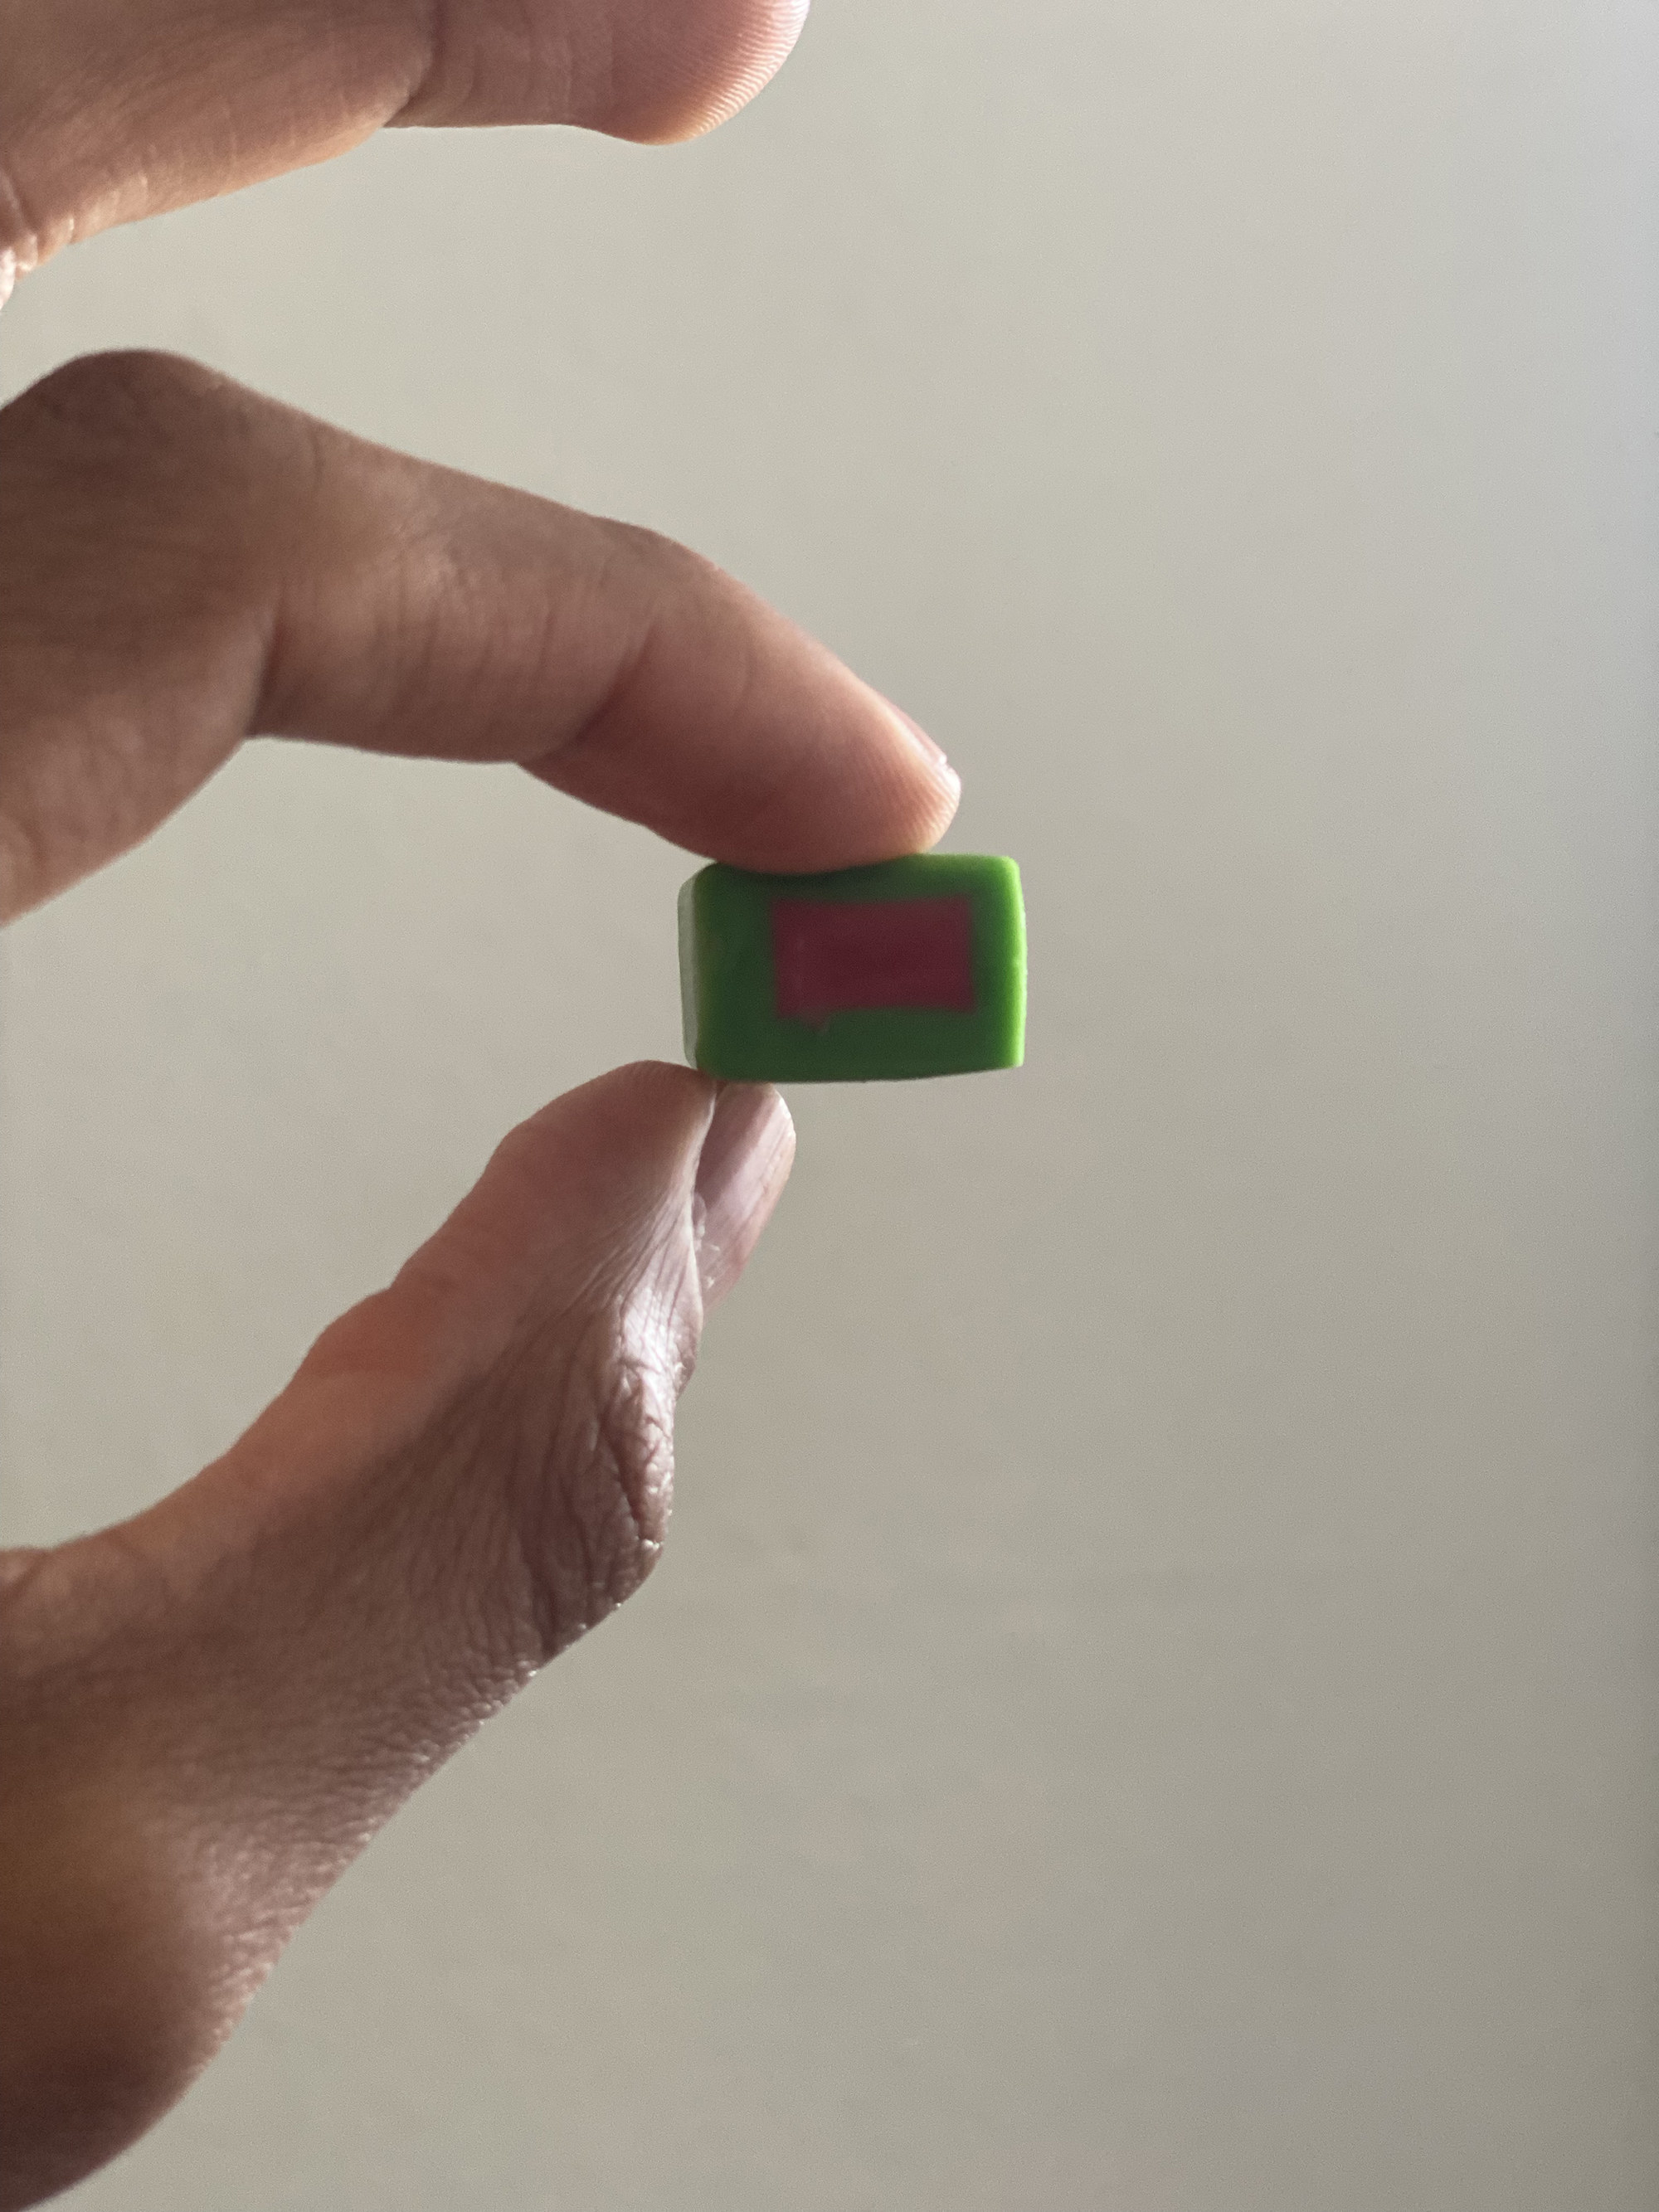 a large square of gum with two different colors for the watermelon flavor